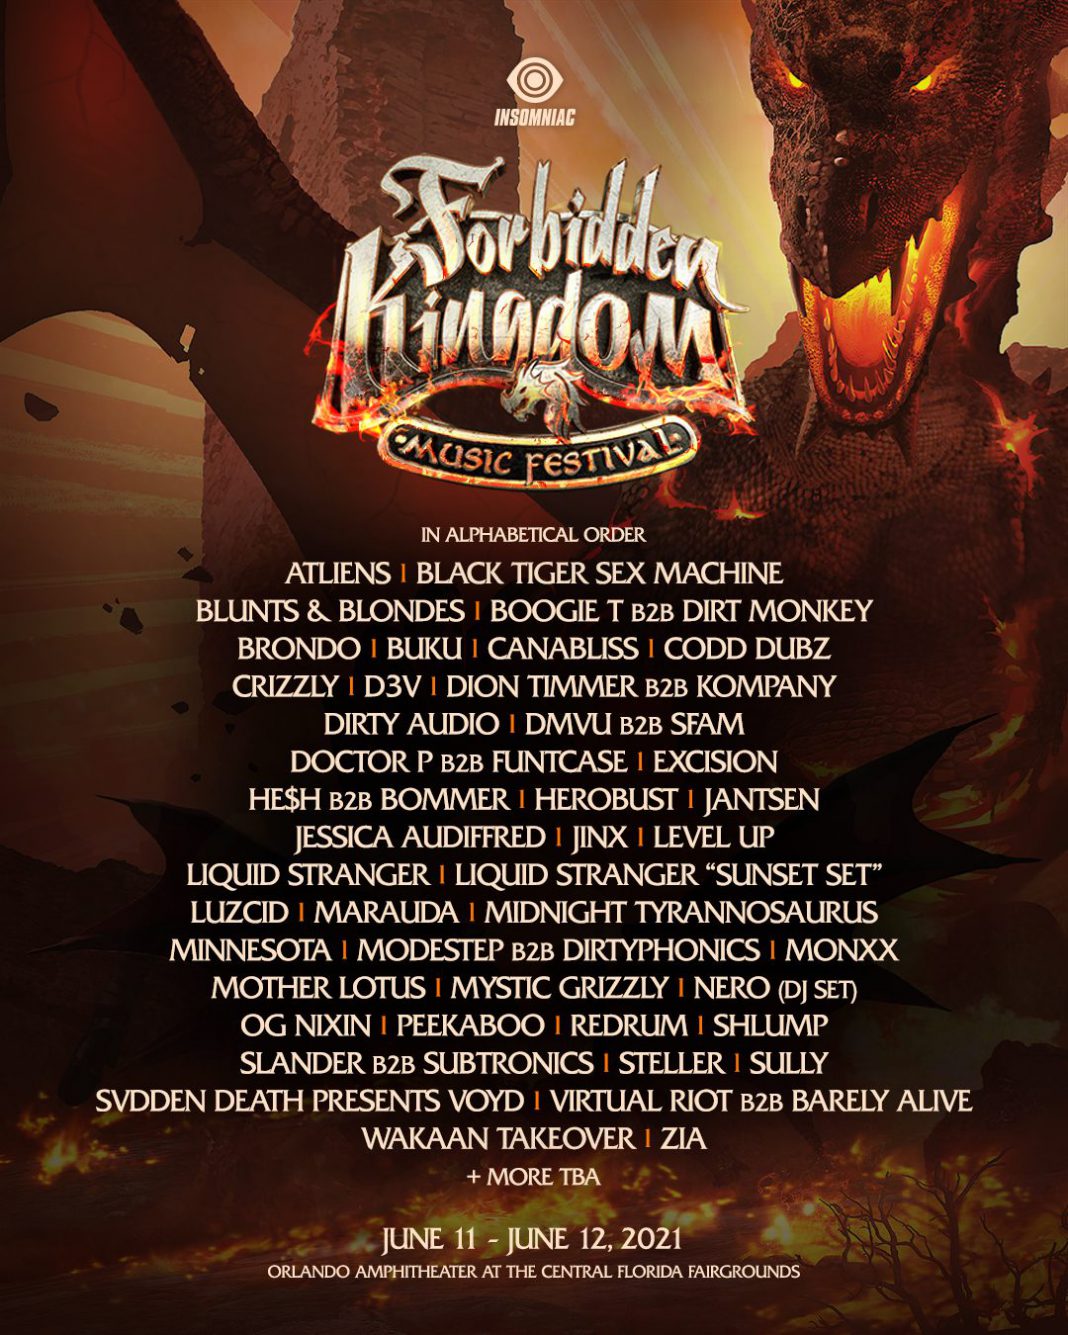 The Forbidden Kingdom 2021 Phase 1 Lineup Brings the Bass EDM Identity